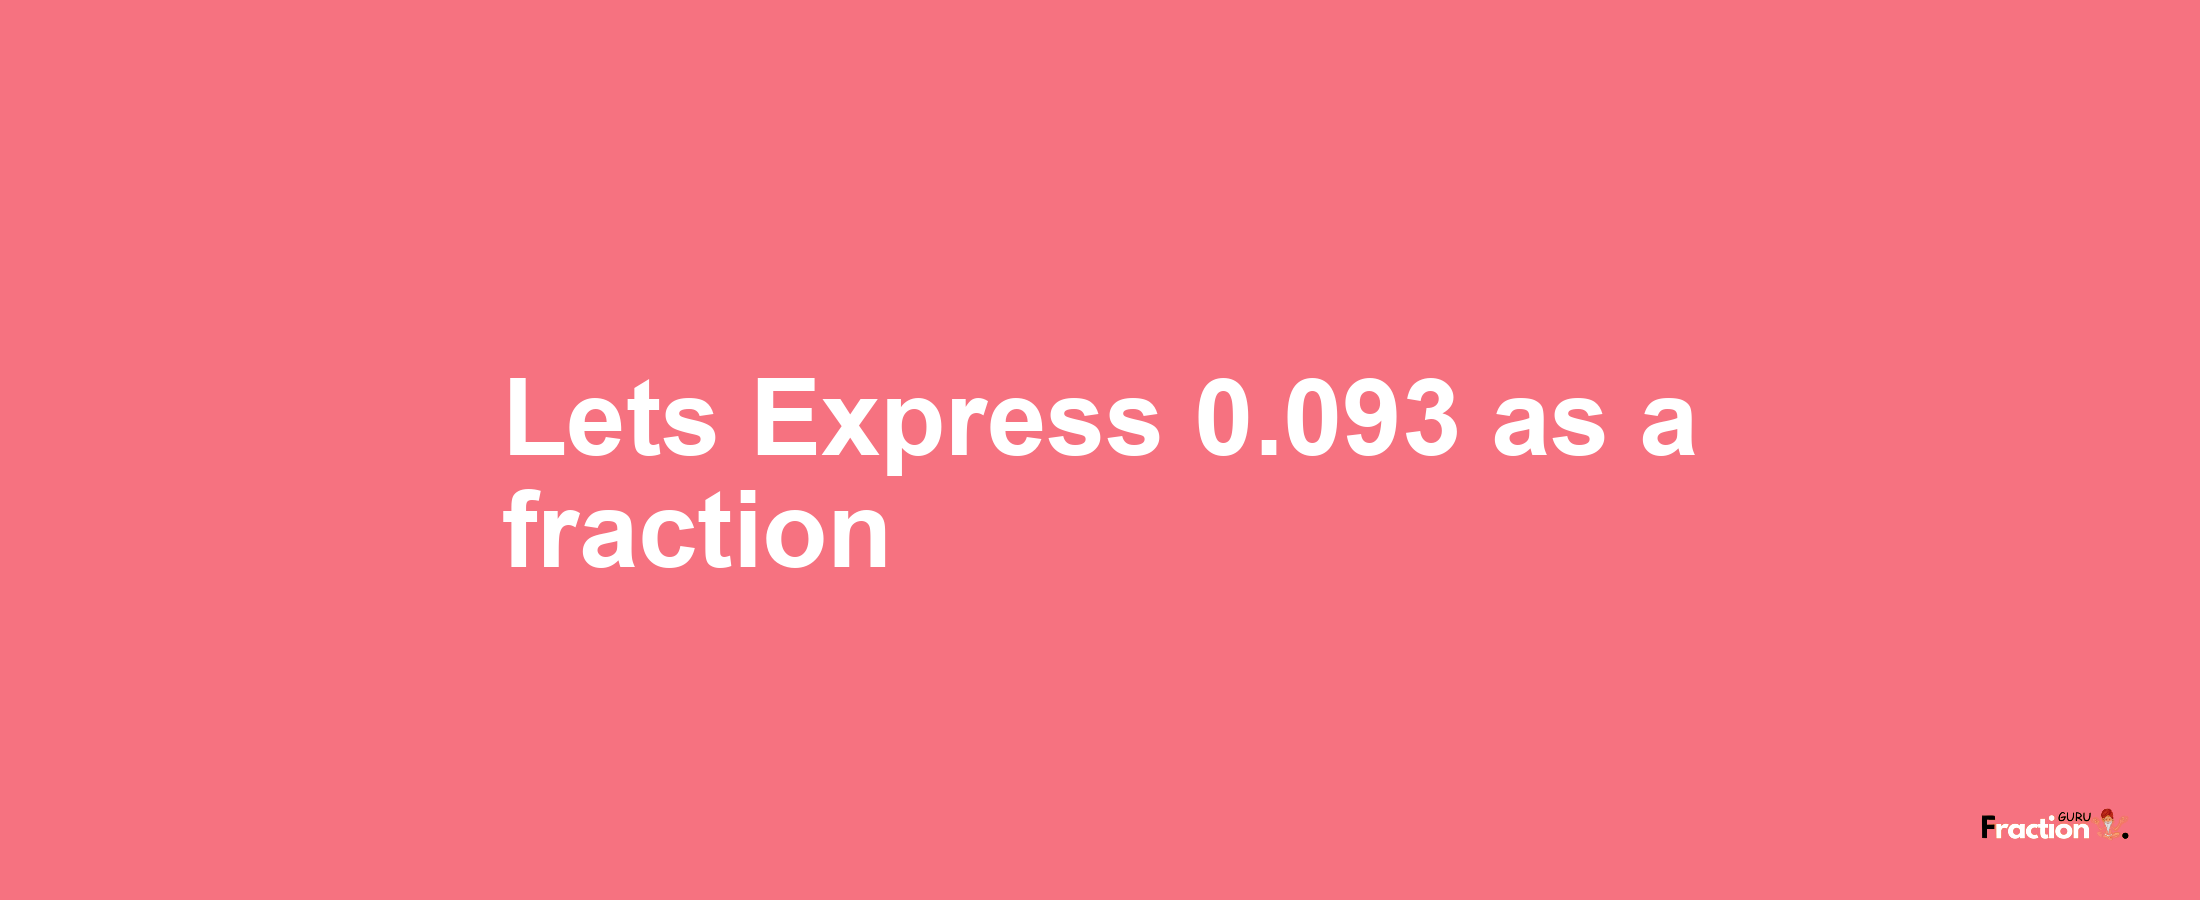 Lets Express 0.093 as afraction